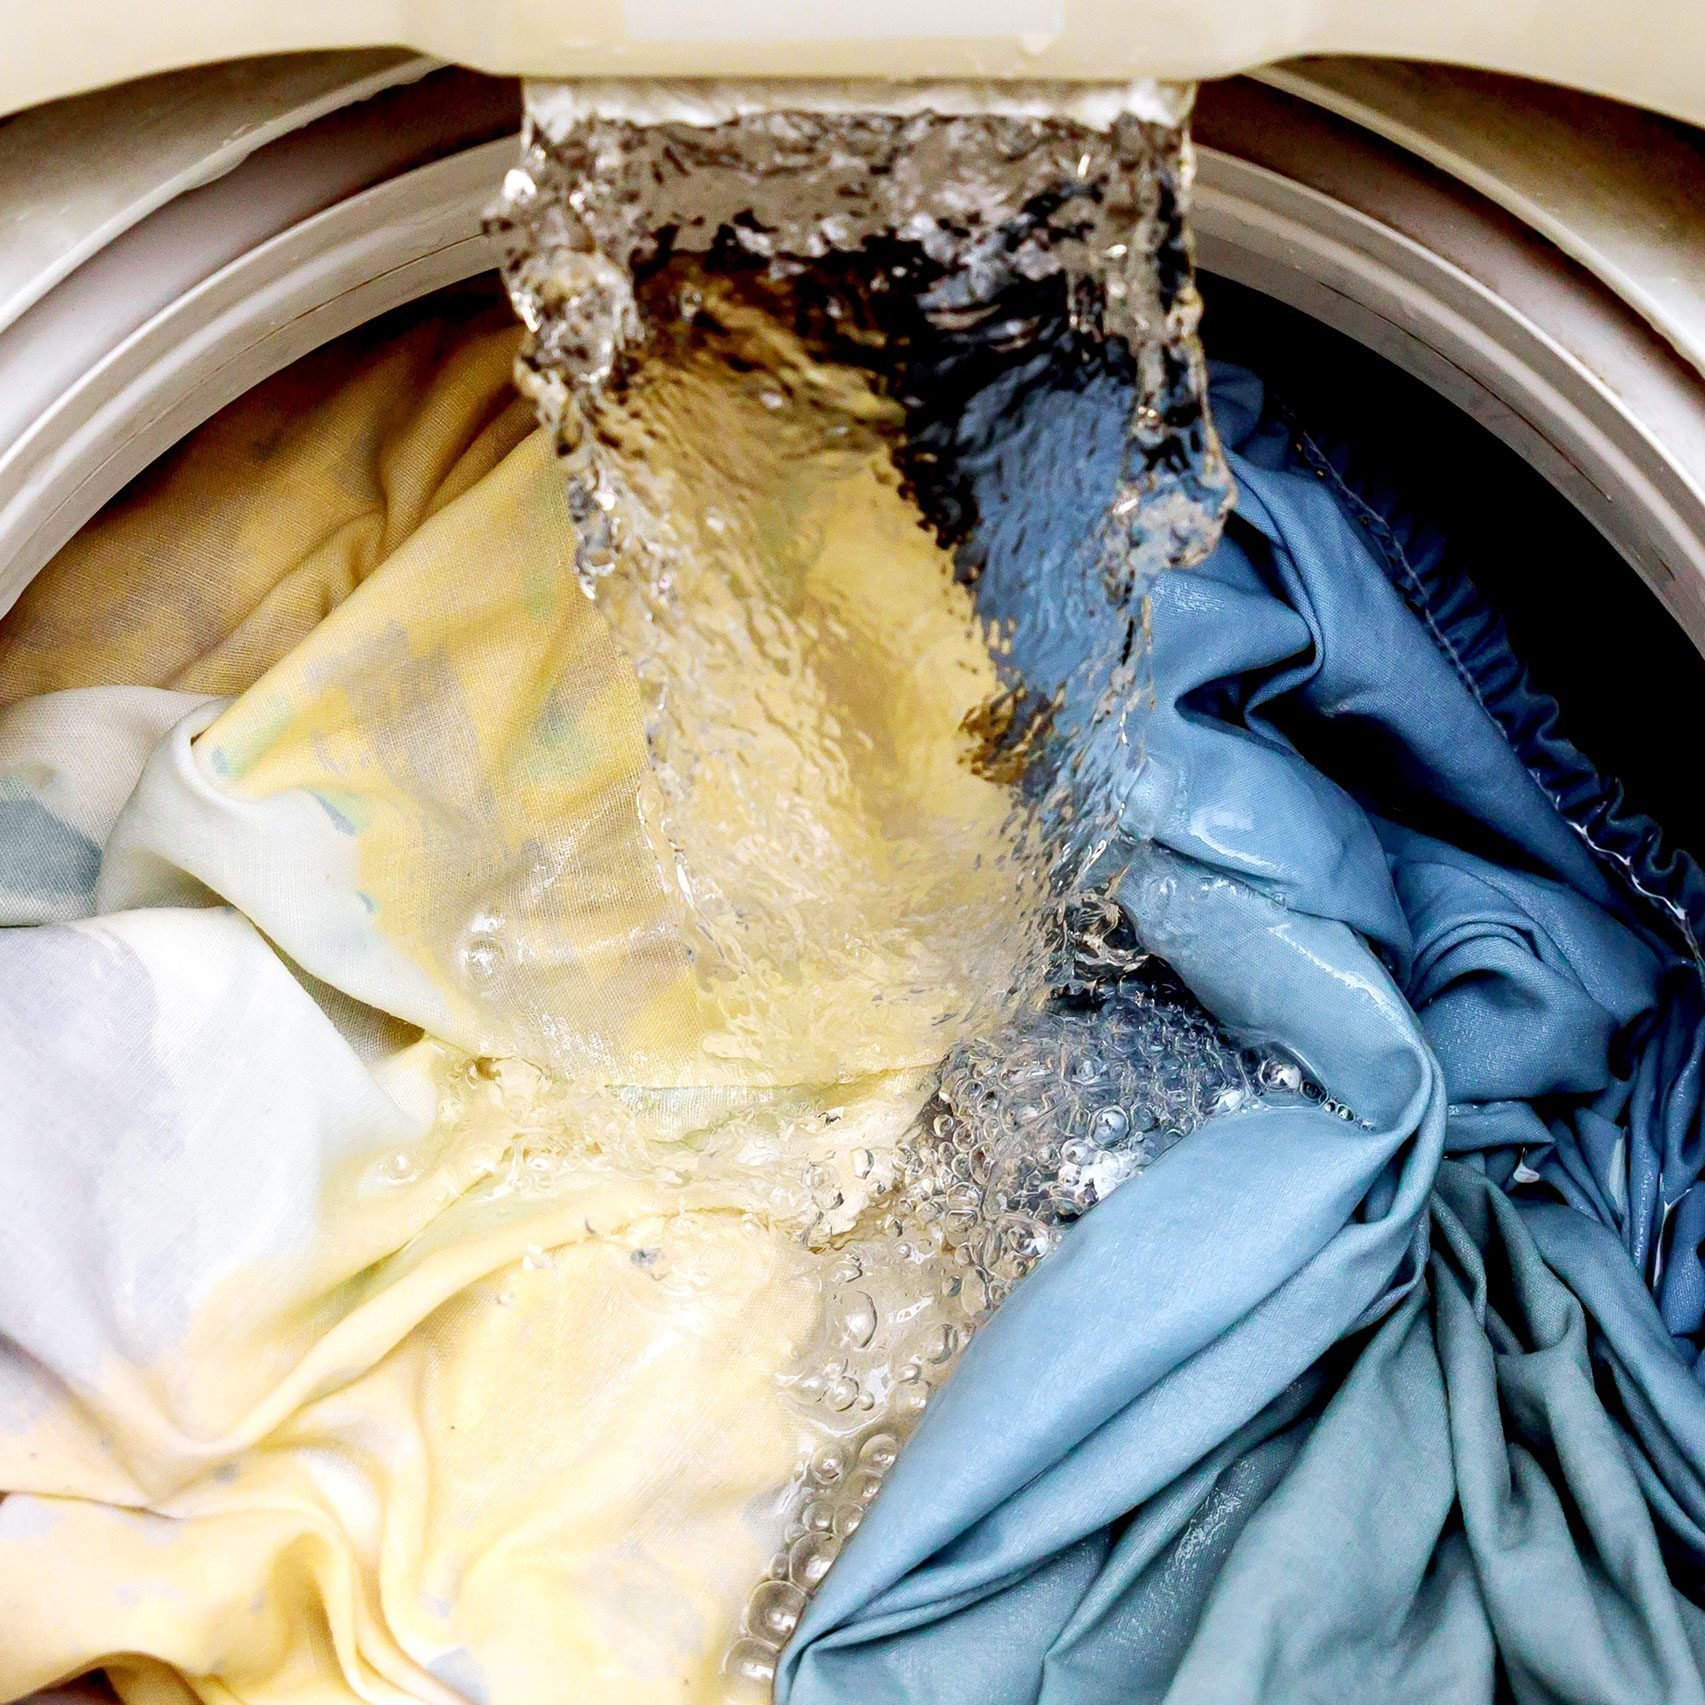 What Temperature Should You Wash White Clothes At?